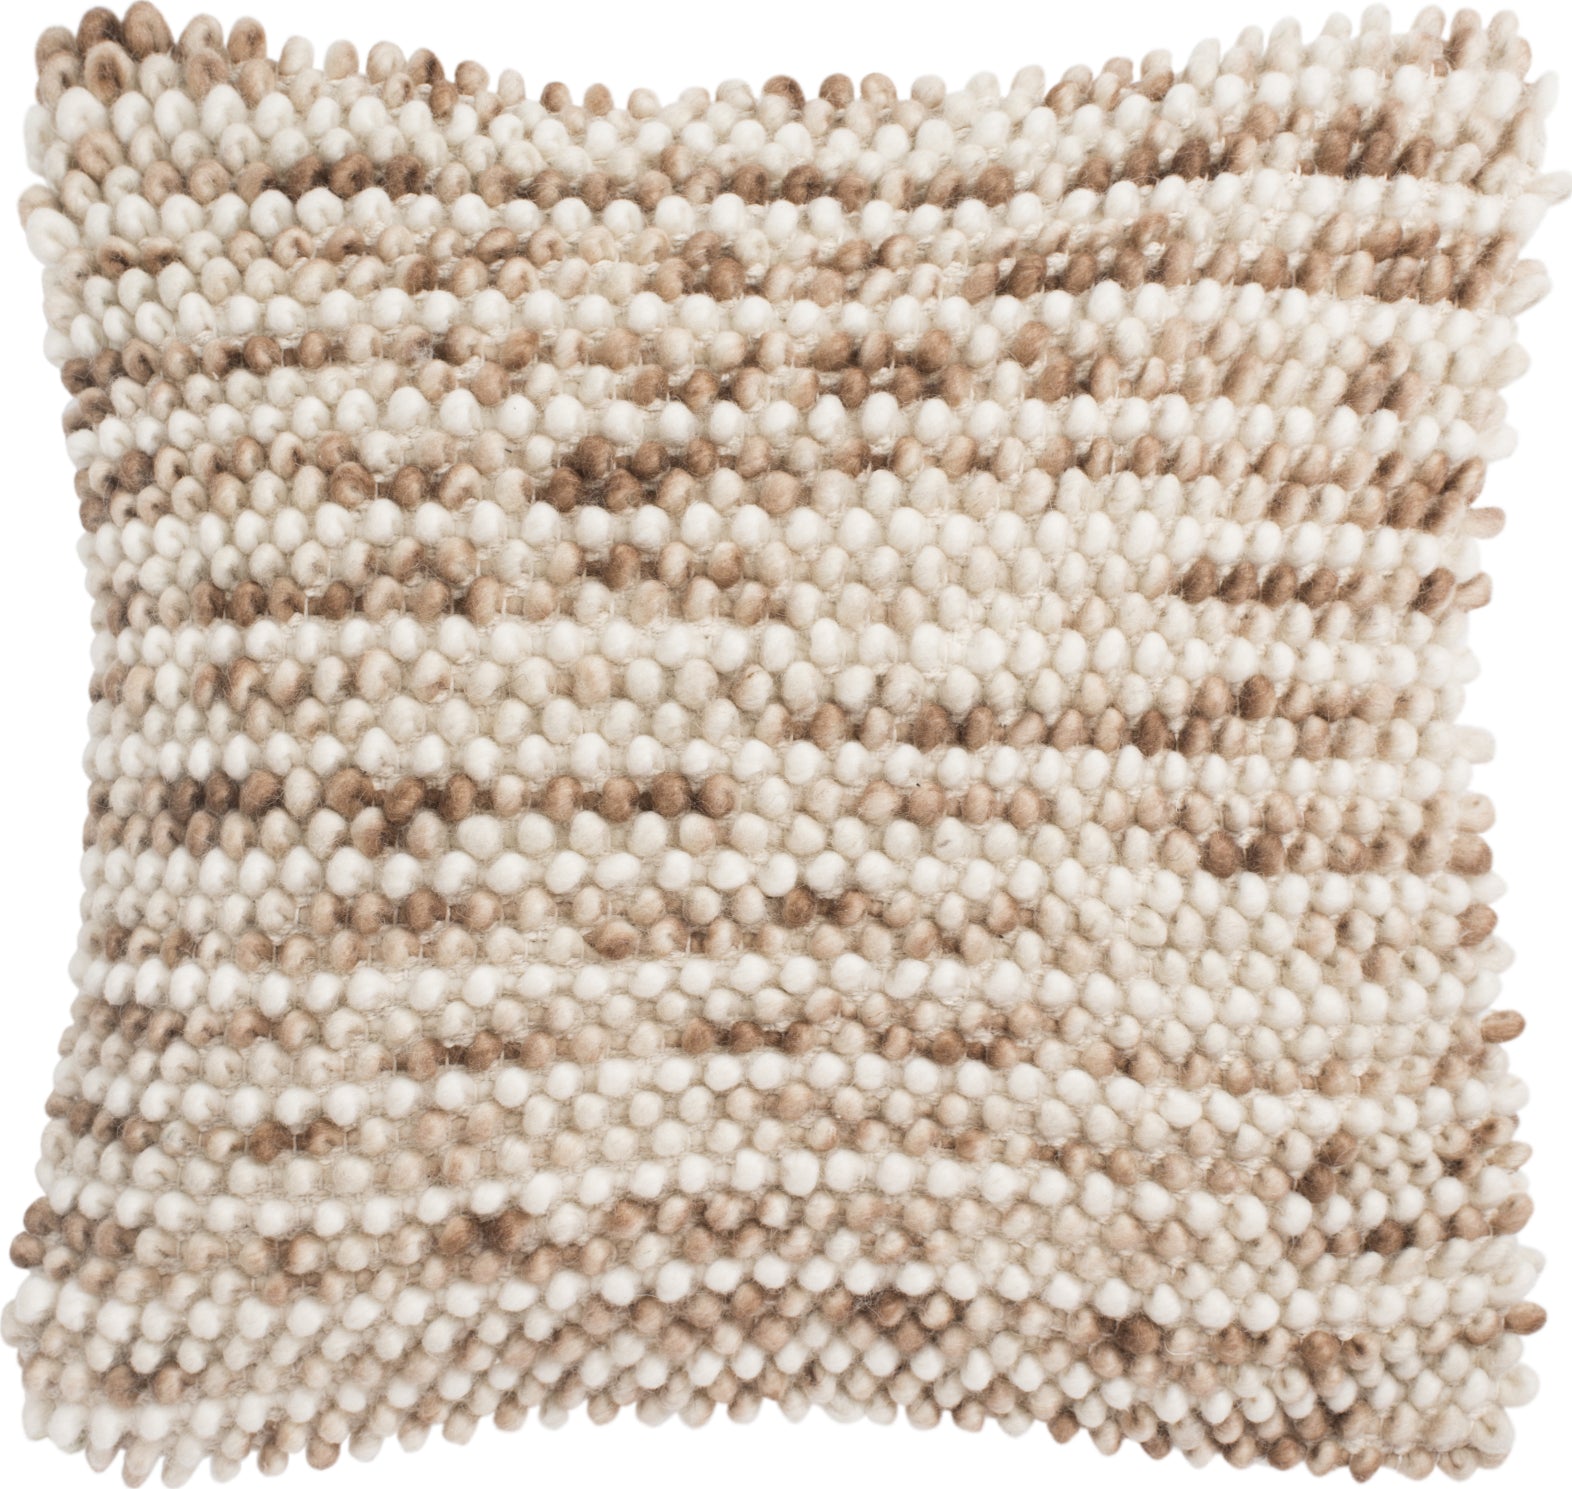 Safavieh Pin Striped Loop Textures and Weaves Eggshell Blend